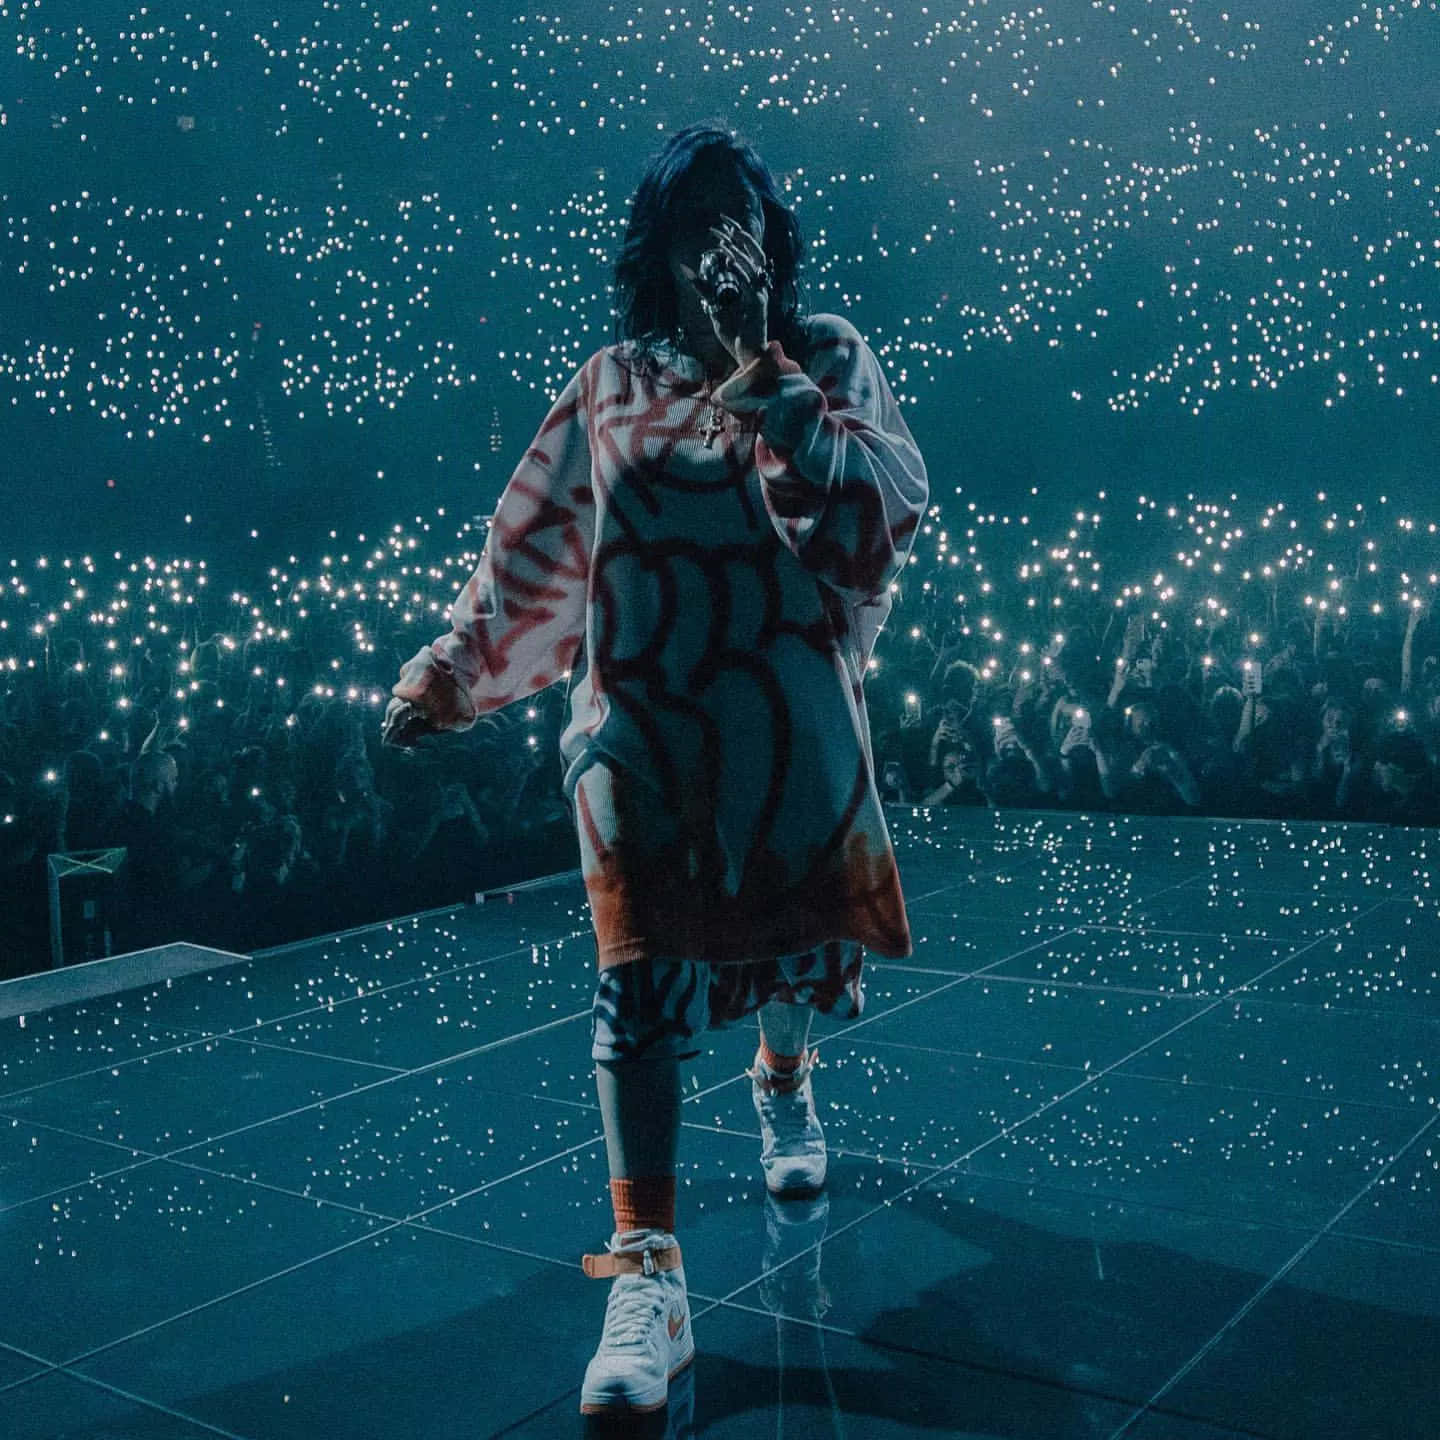 Billie Eilish bringing in 2021 with a bang. Wallpaper